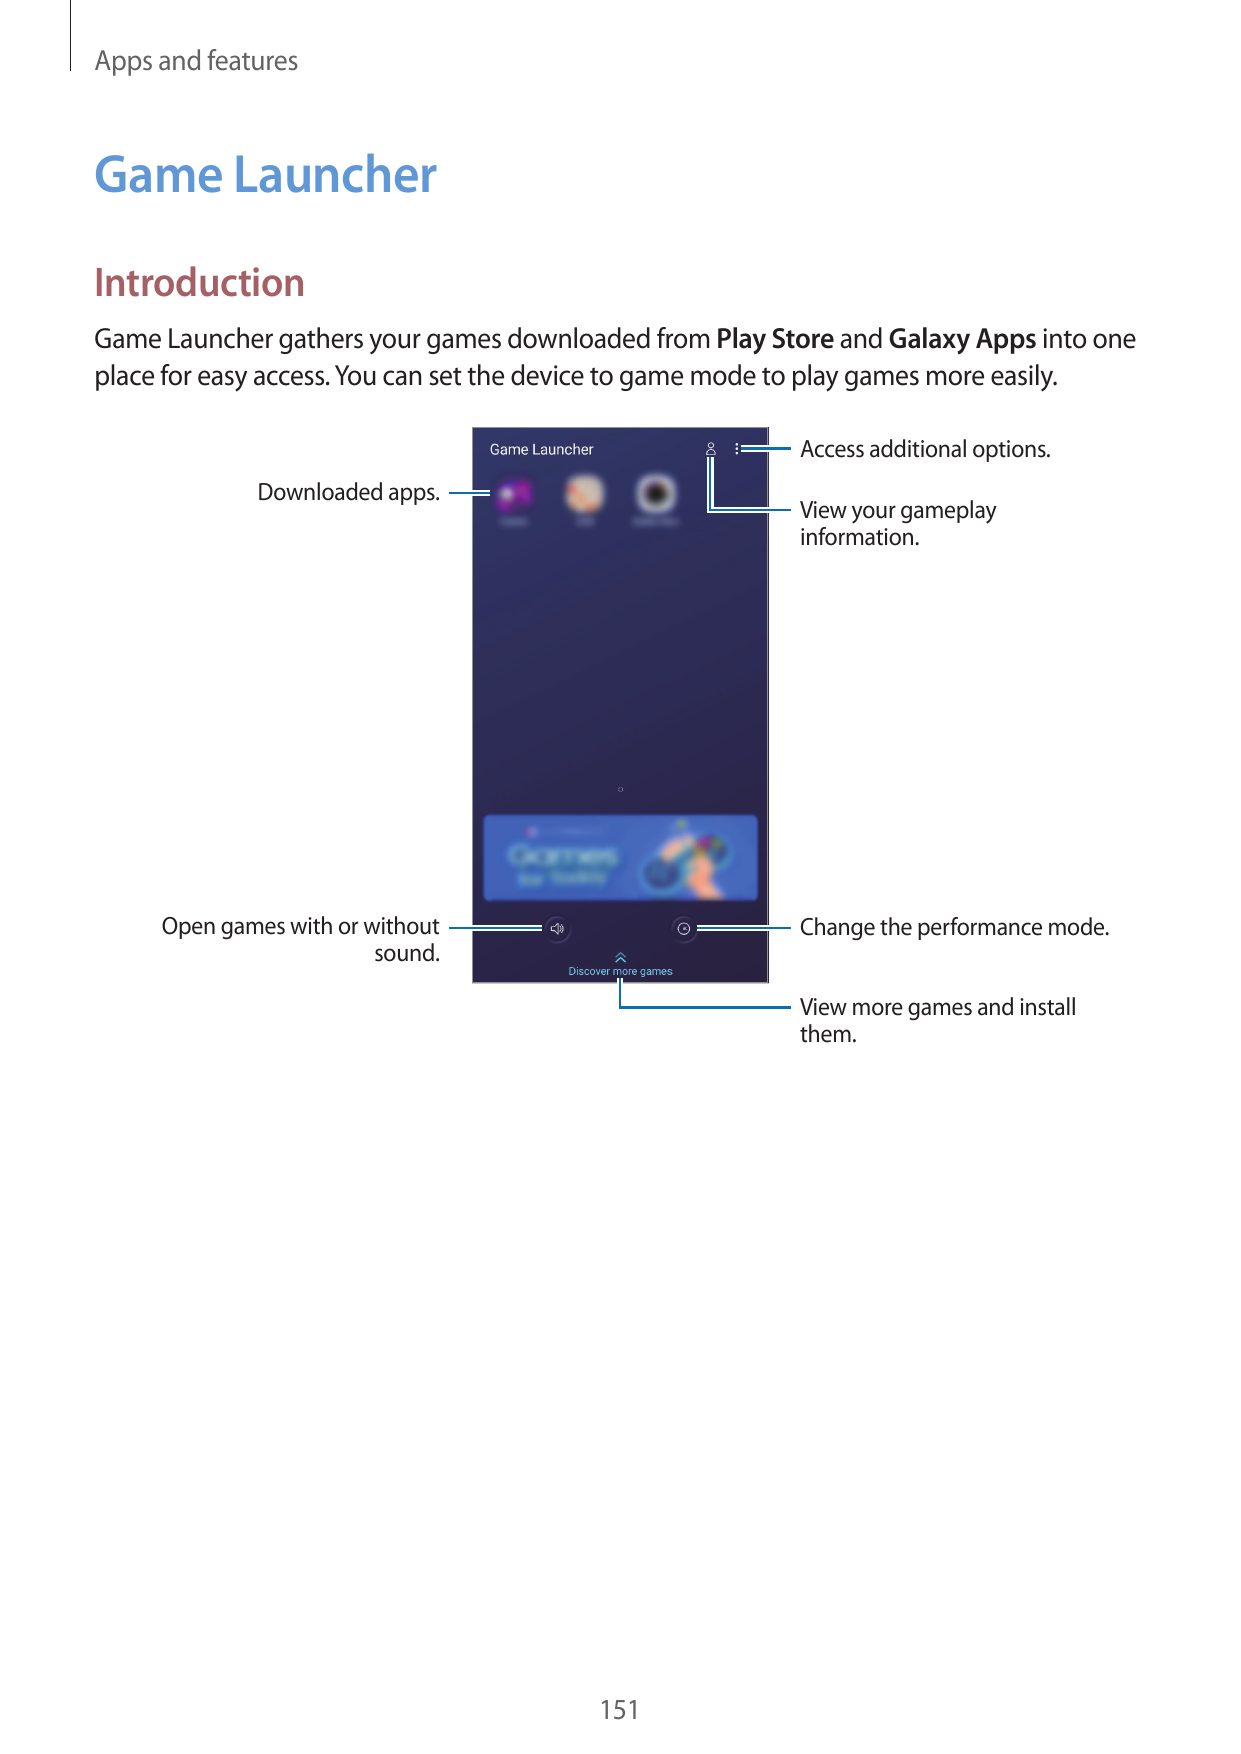 Apps and featuresGame LauncherIntroductionGame Launcher gathers your games downloaded from Play Store and Galaxy Apps into onepl